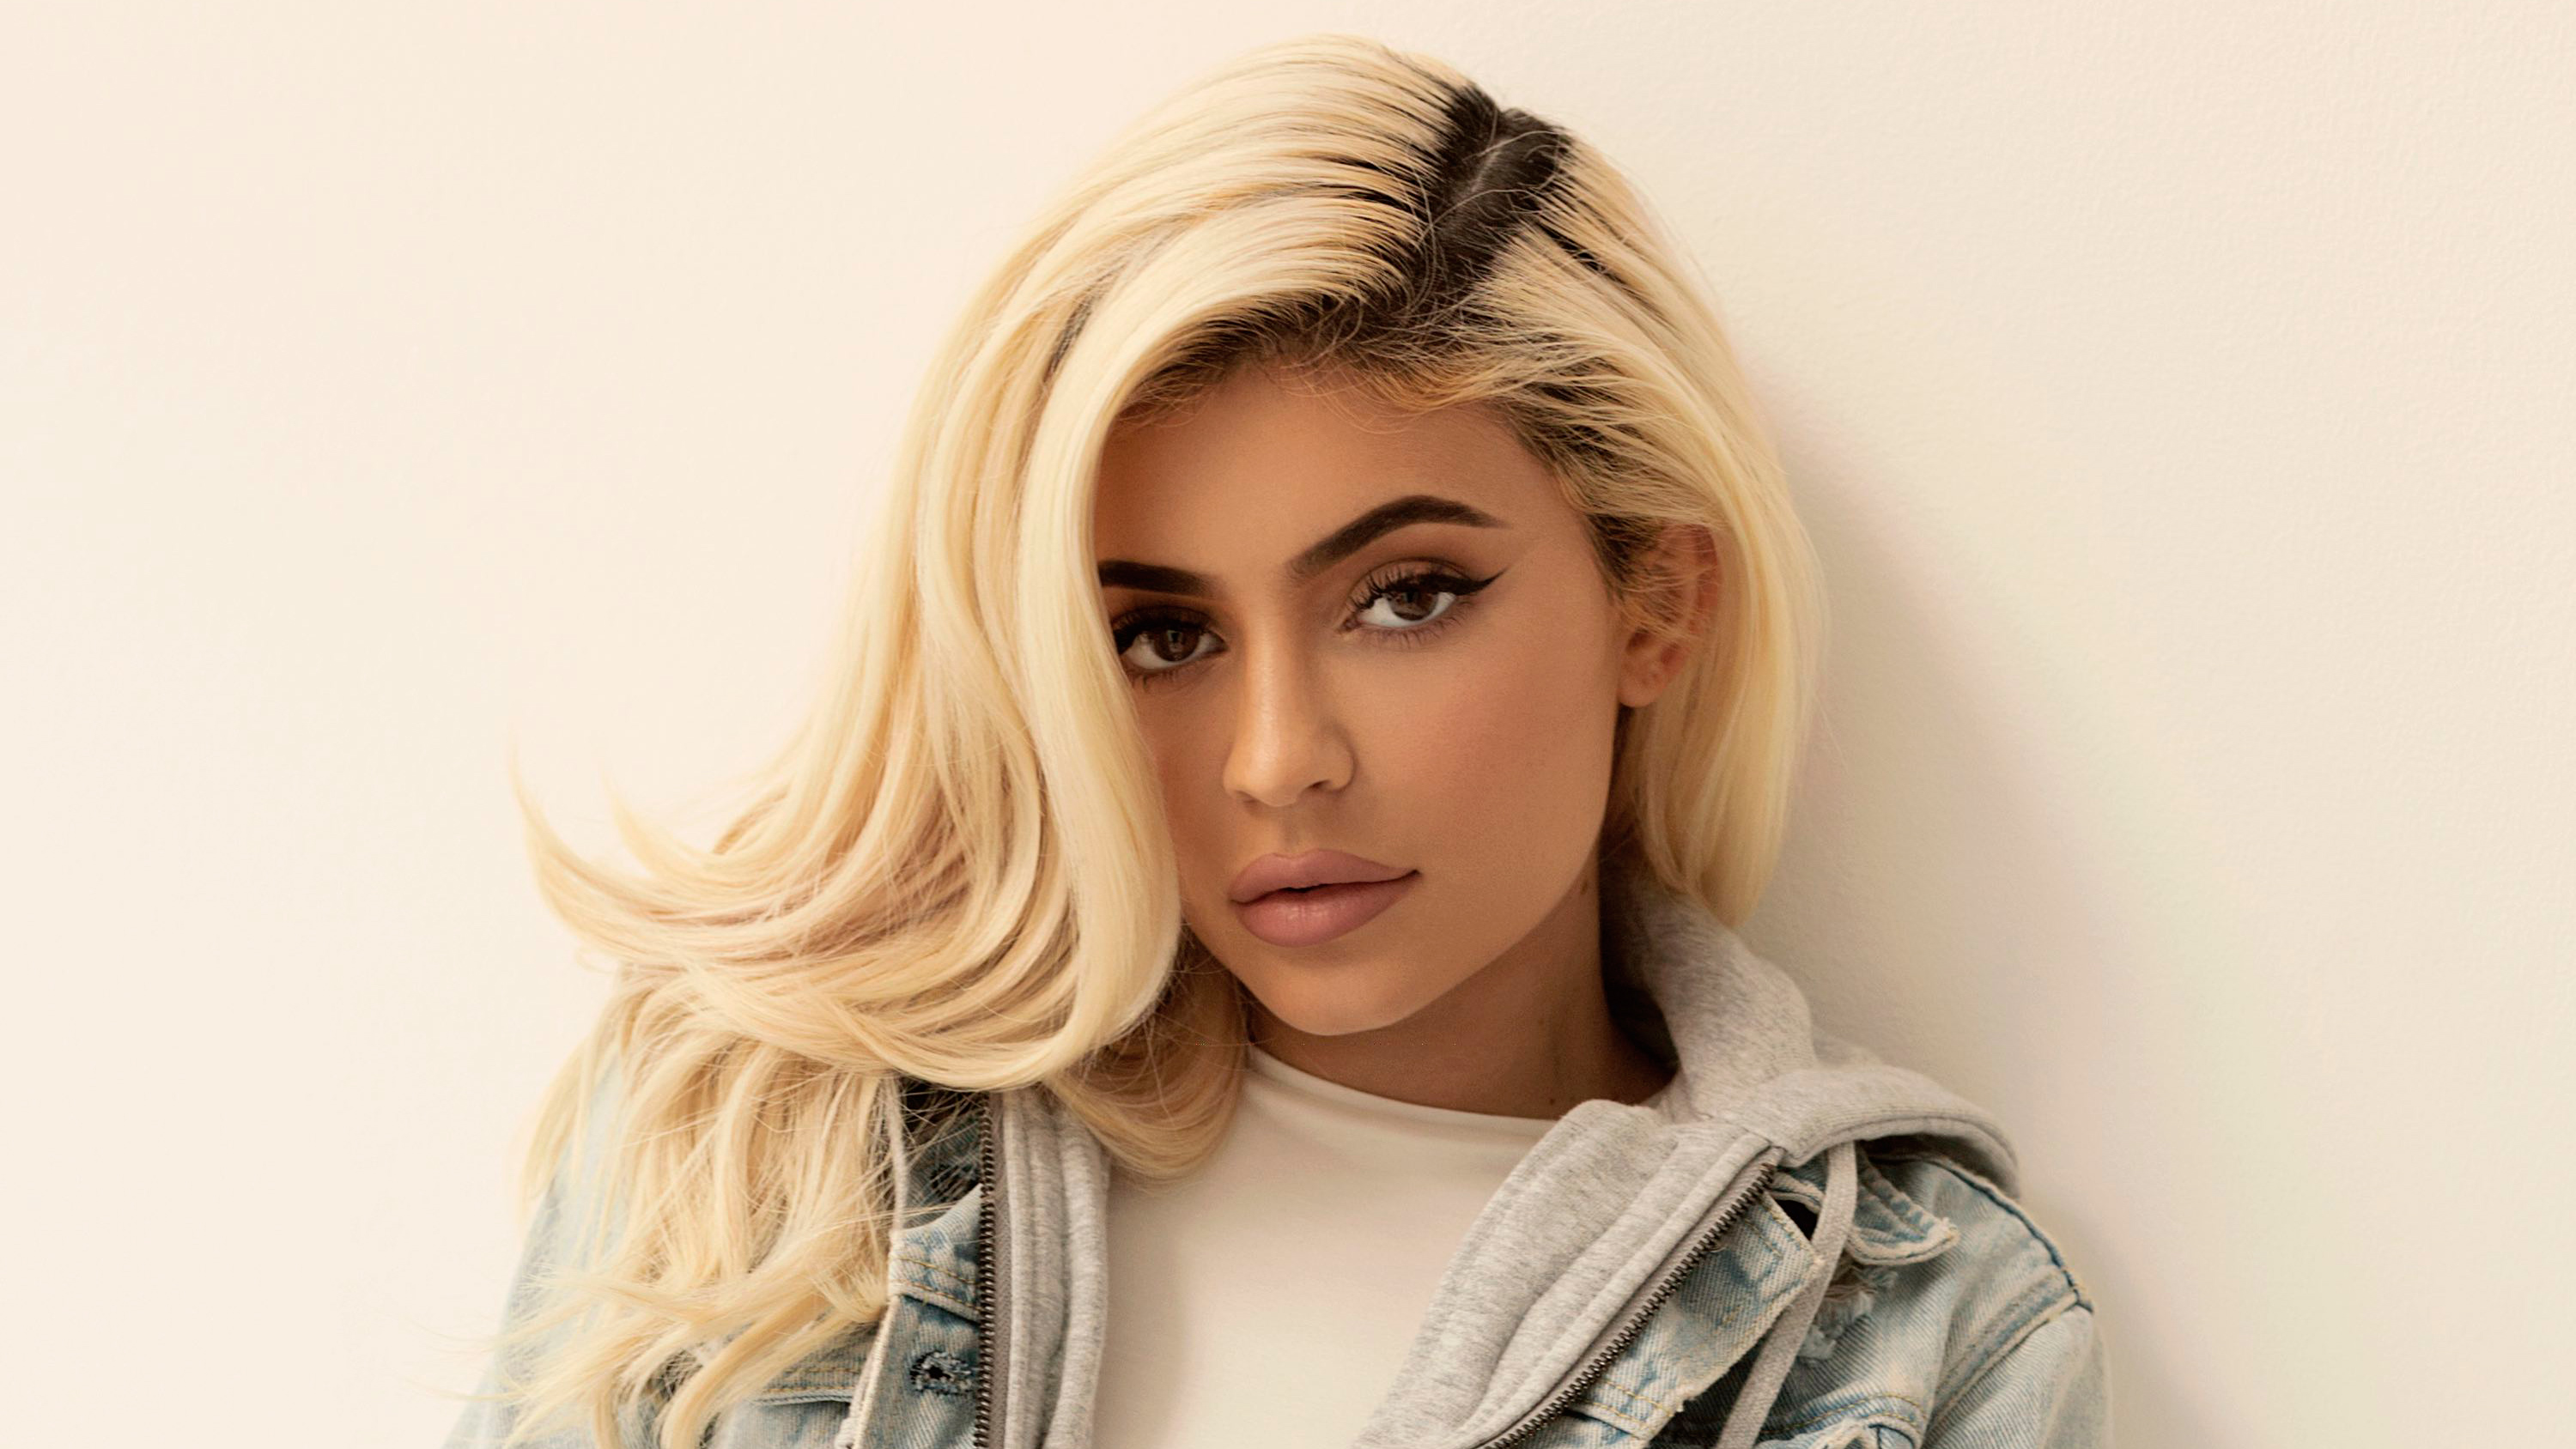 Kylie Jenner 2019 Latest Laptop Full HD 1080P HD 4k Wallpaper, Image, Background, Photo and Picture